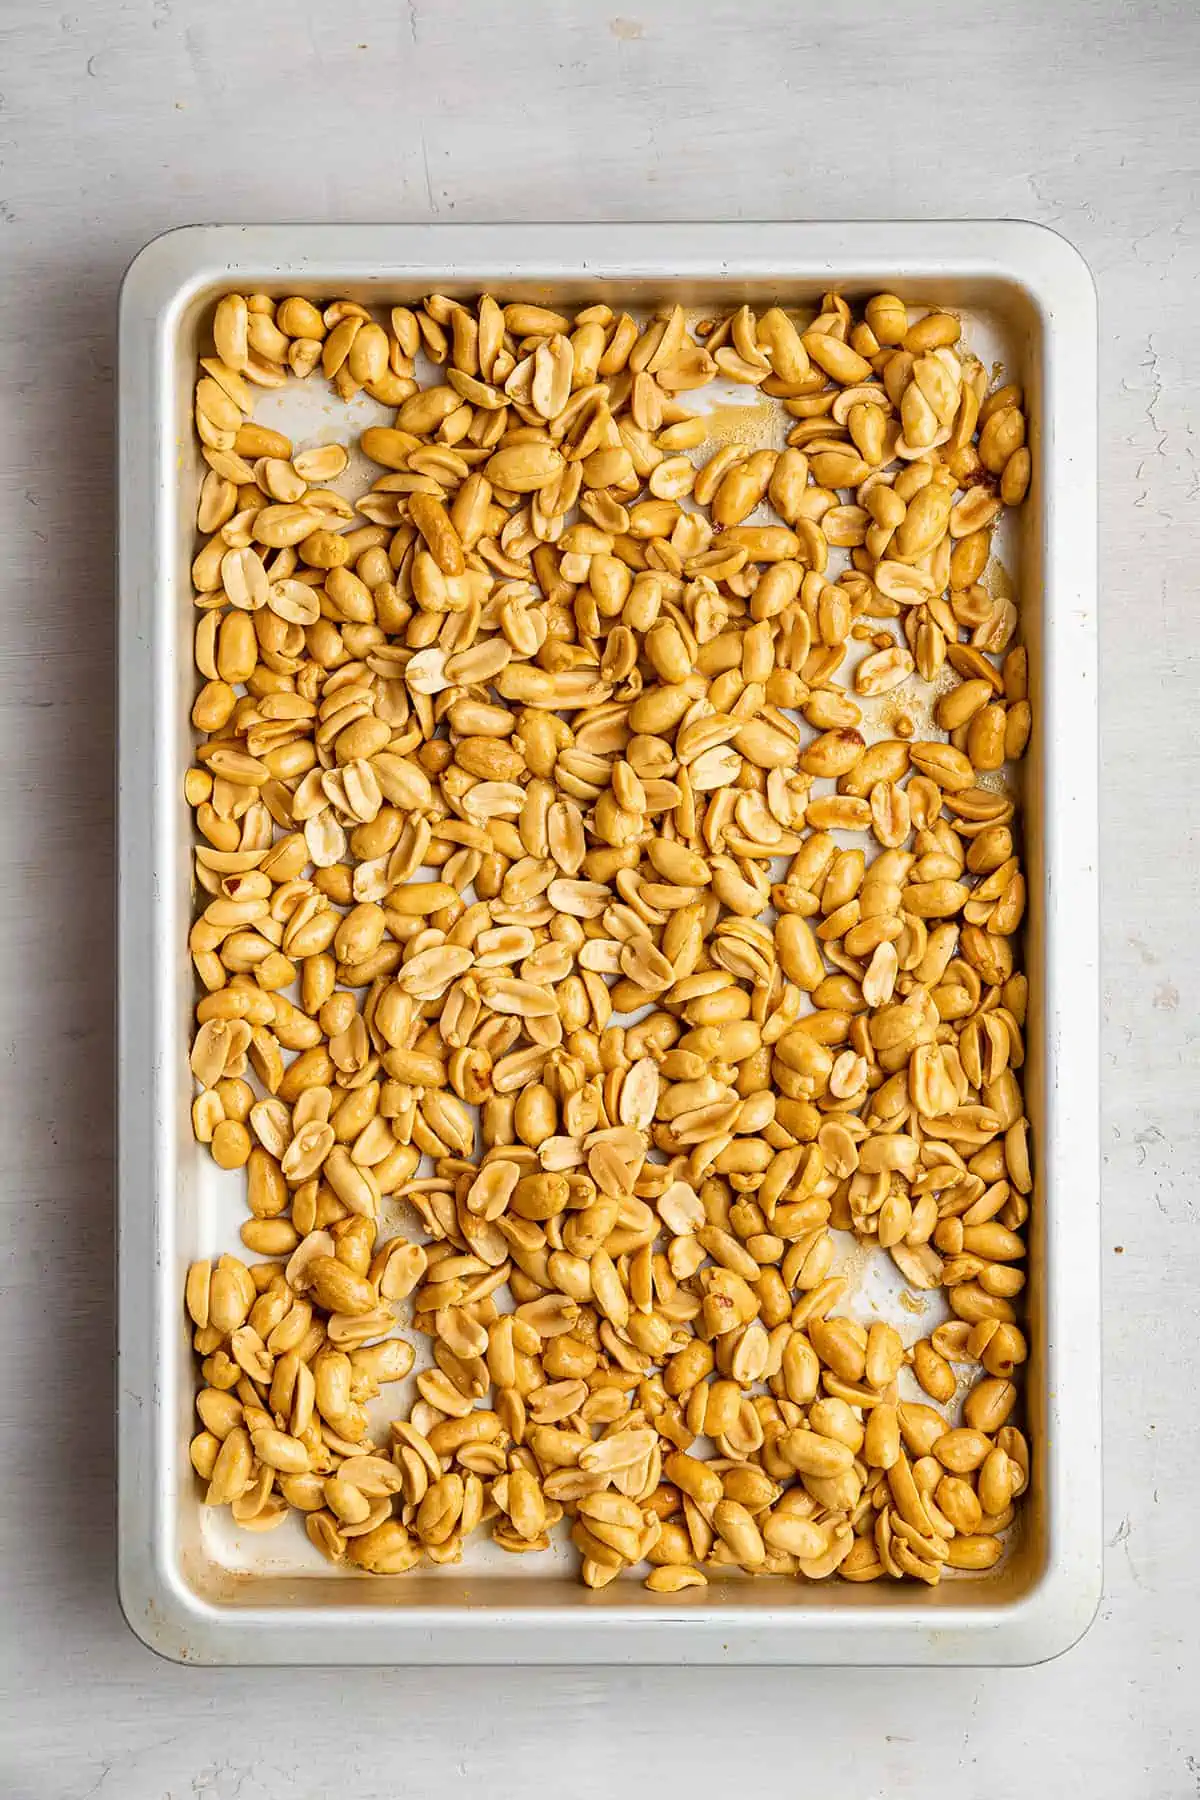 A baking tray with peanuts, honey, and salt on it